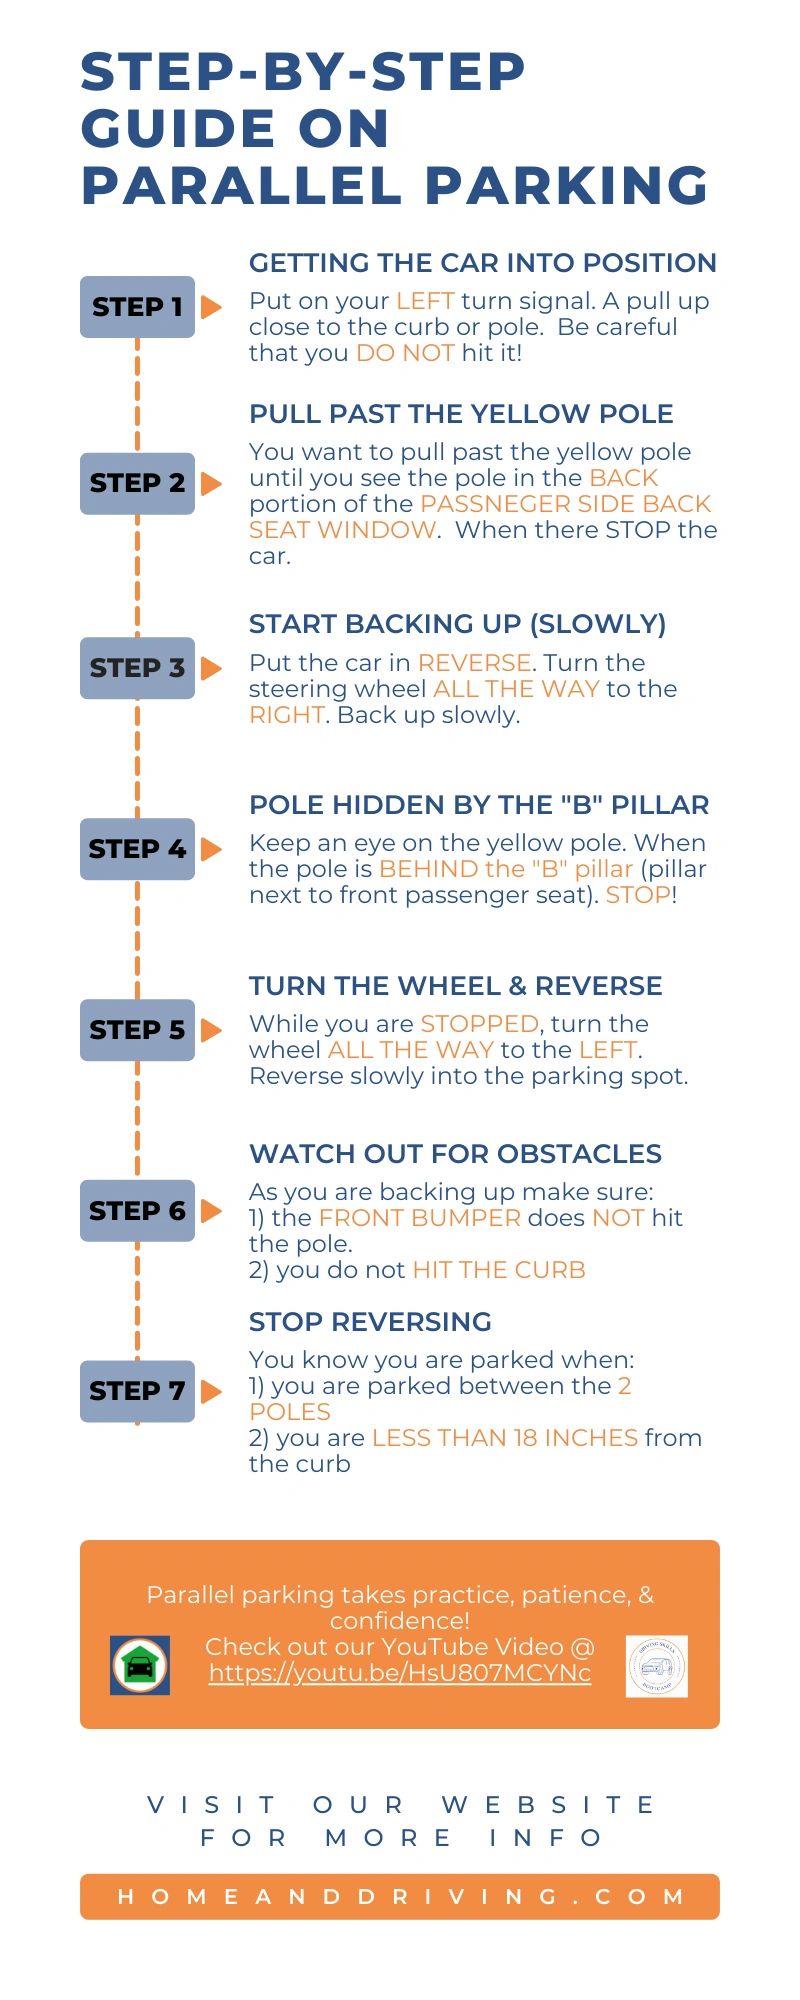 opdagelse pust kolbe How to Parallel Park! Simple 7-Step Guide